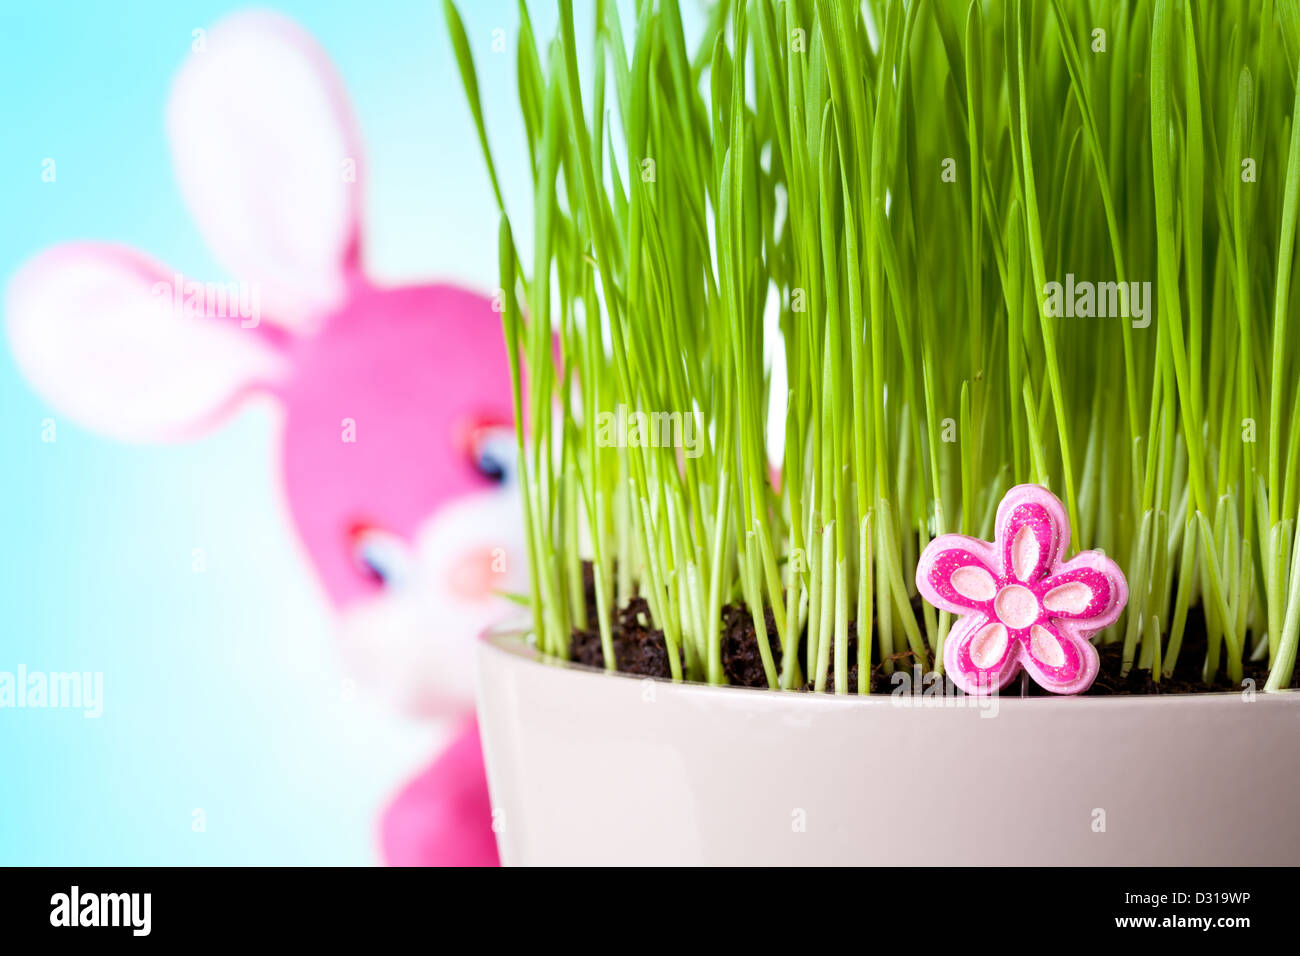 Easter rabbit sitting behind the grass with his face to camera. Focus on pink flower. Stock Photo